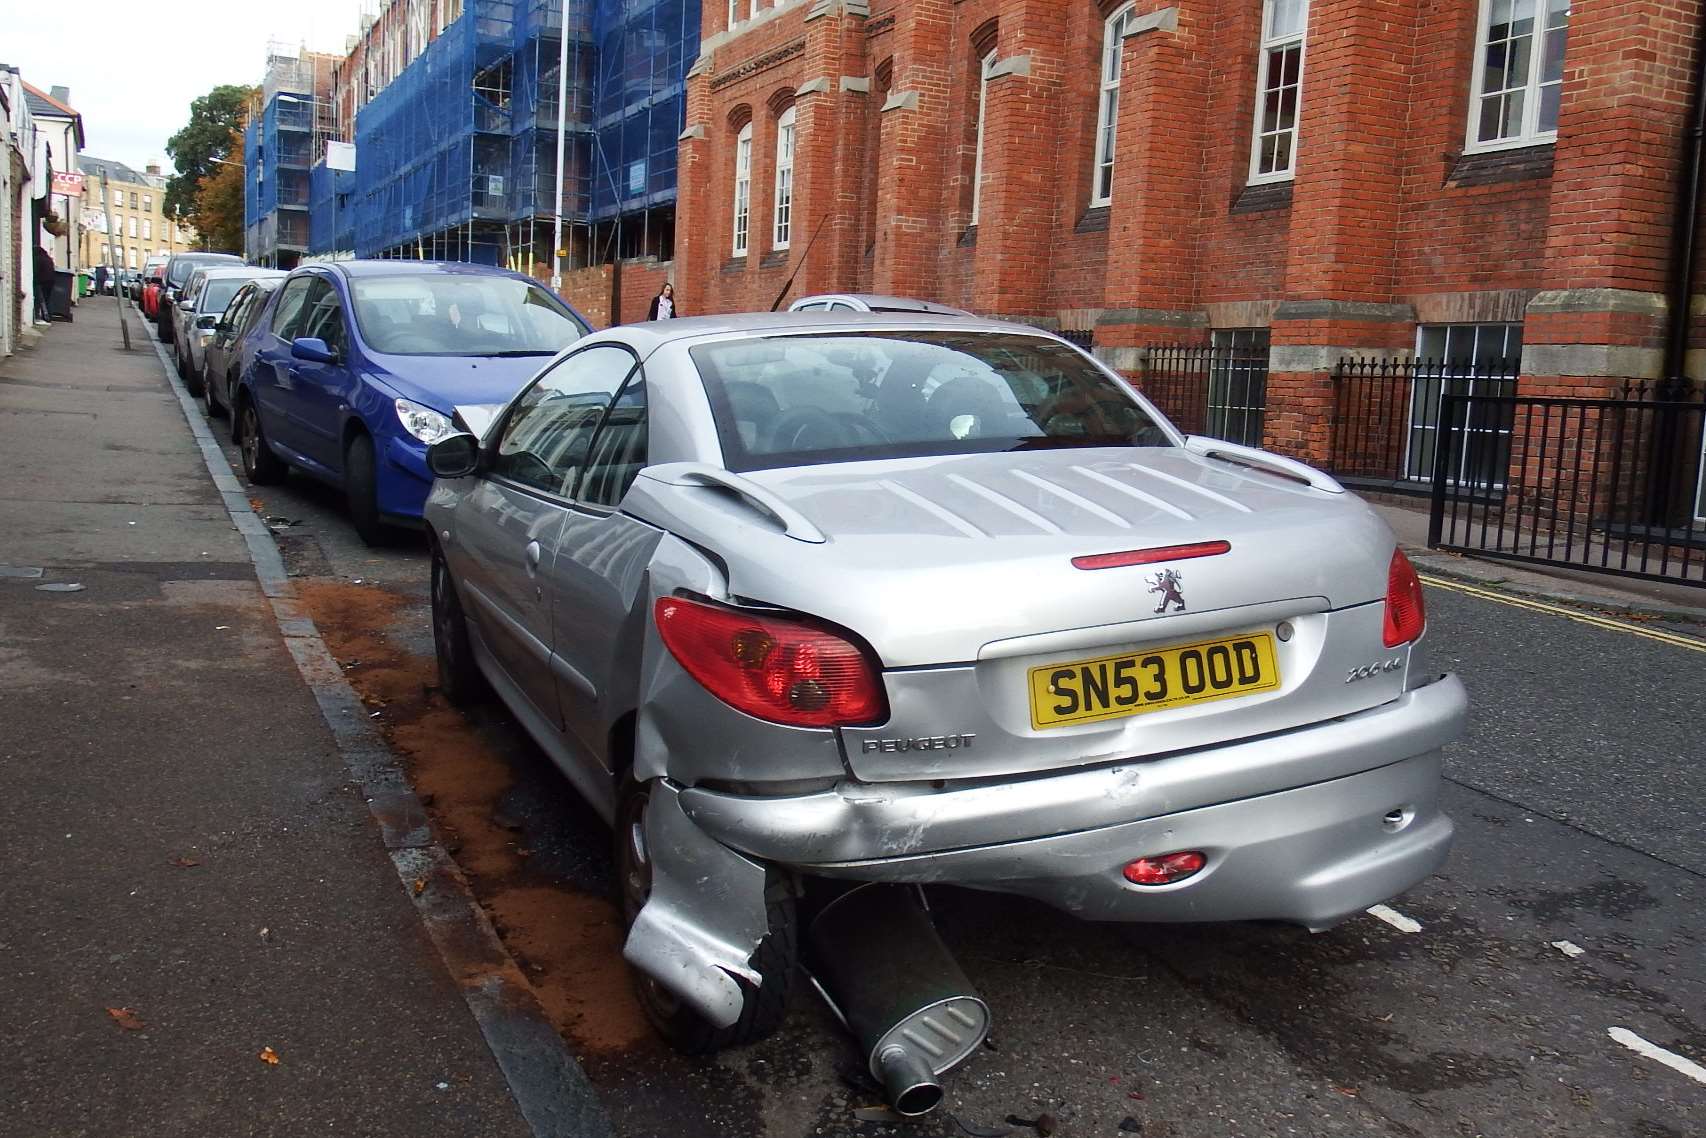 One of the damaged vehicles in Chatham Street, Ramsgate. Picture: Mike Pett